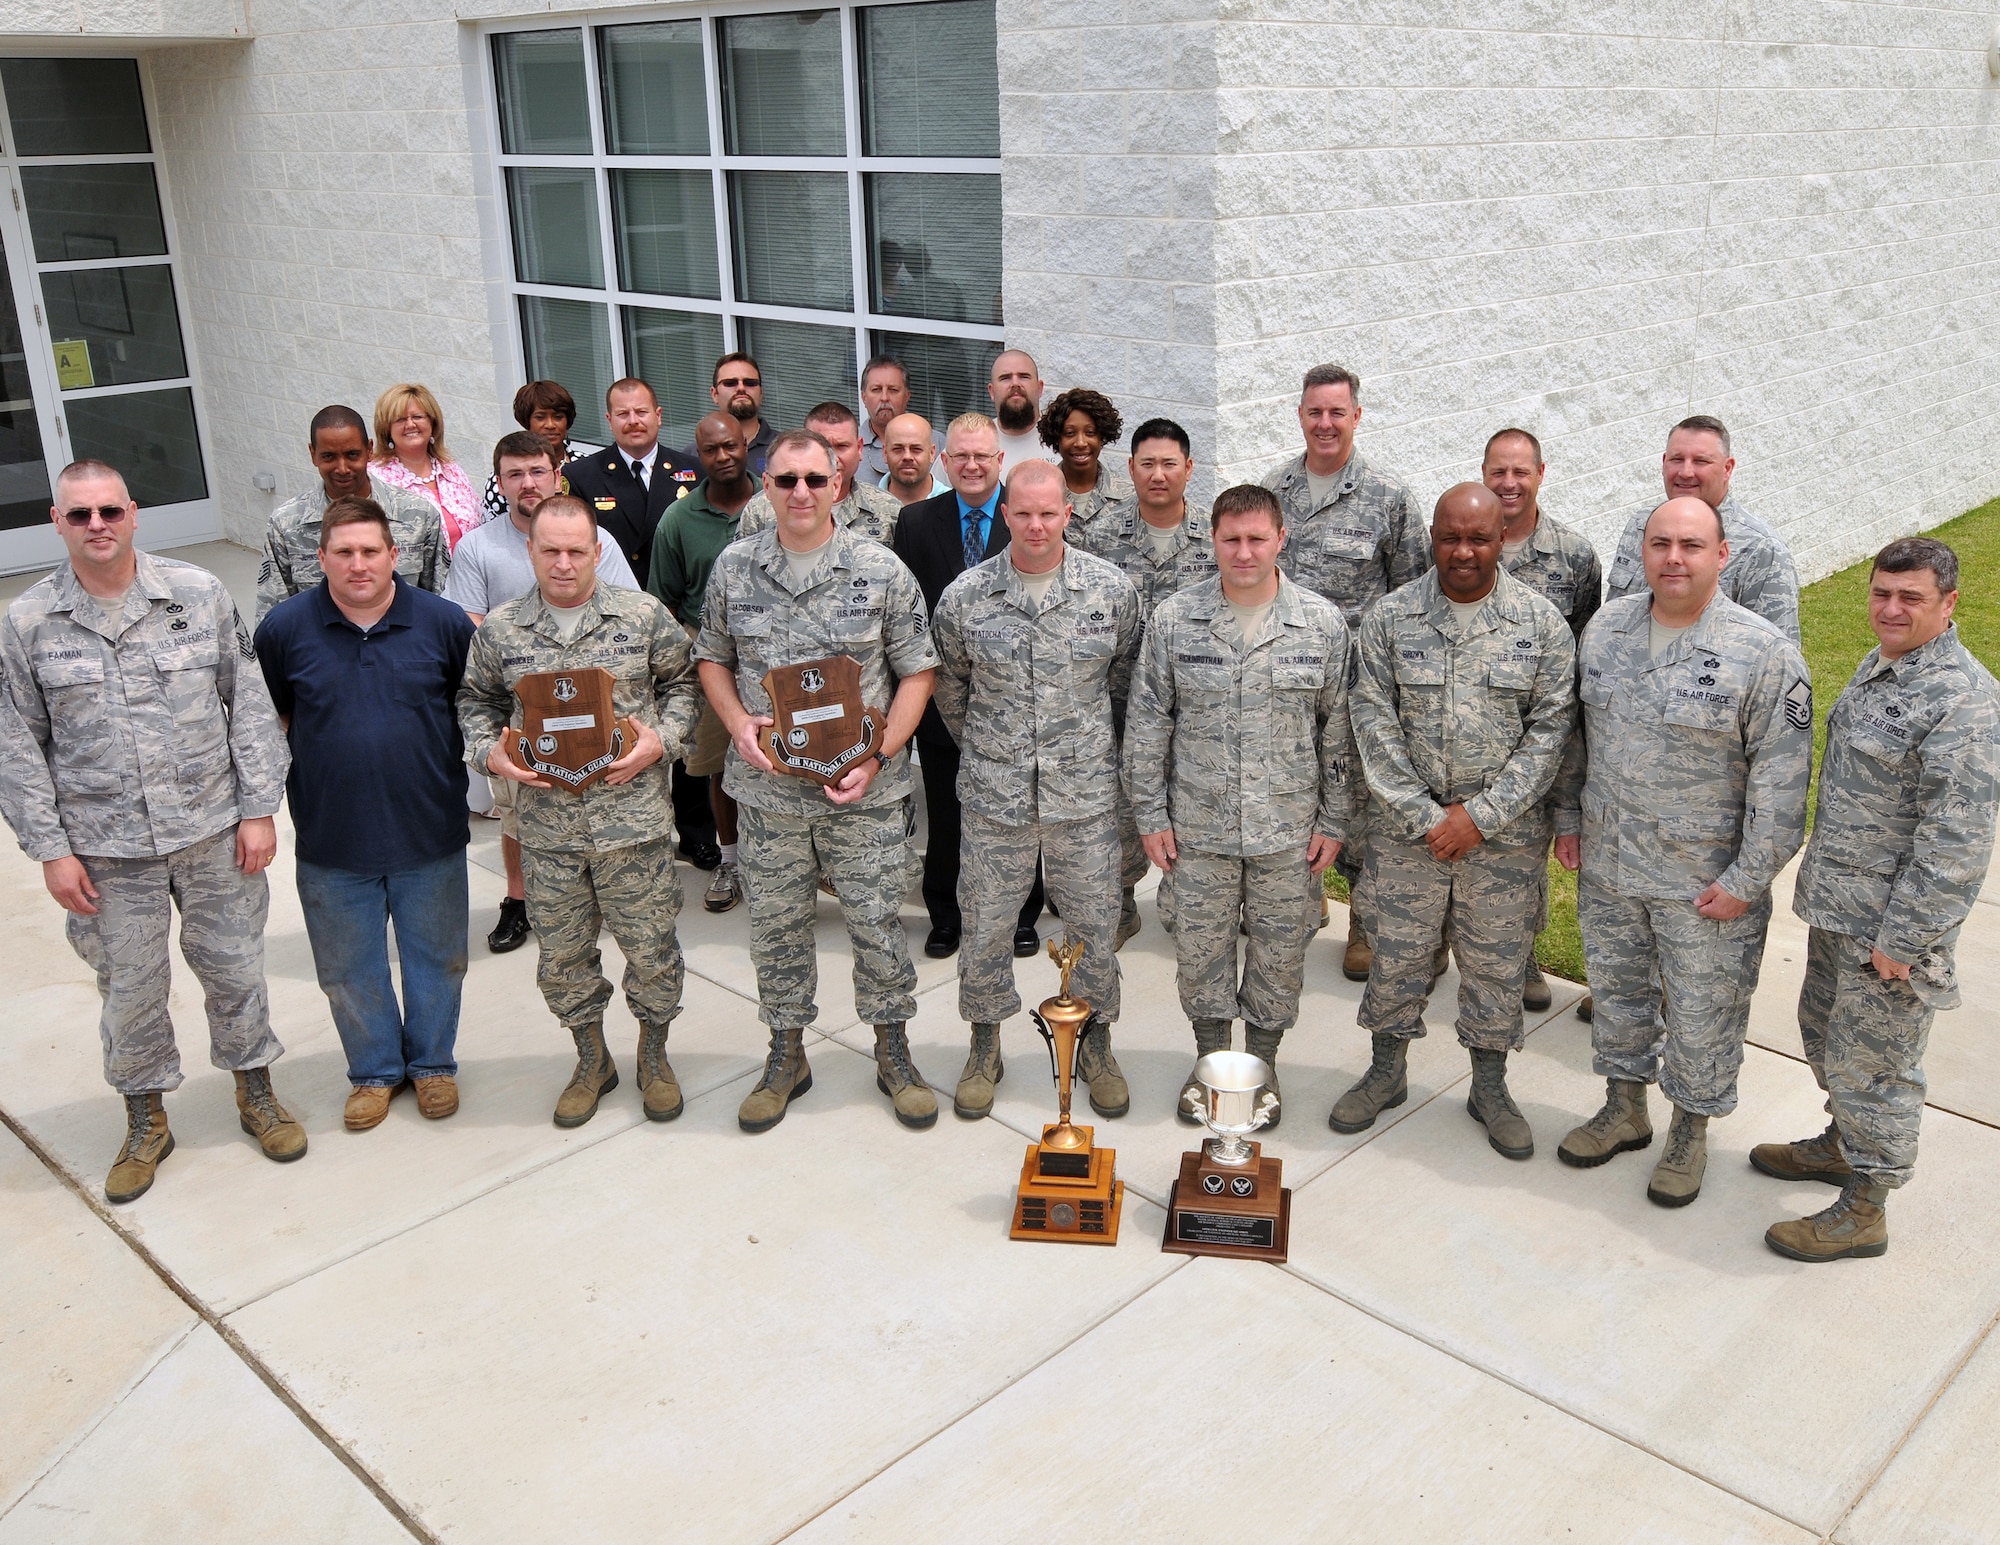 U.S. Air Force Chief Master Sgt. Dan Eakman,  ANG Civil Engineer Career Field Manager and Air Force Col. Peter “Puck” Sartori, Director of Installations and Mission Support and The Civil Engineer for the Air National Guard at Joint Base Andrews, Maryland, pose with military and civilian members of the 145th Civil engineering Squadron after they were presented with the Society of America Military Engineers Curtain Award for Air Force Outstanding Unit of the Year, the Col. Fredrick J. Riemer Award, for ANG Outstanding Readiness & Emergency Management Flight and  Col. William L. Deneke Award for Outstanding Unit of the Year Award.  These annual awards recognize the best CE squadron from all Air Reserve components in the United States that best demonstrates exemplary performance in support of the engineer readiness mission. The ceremony was held on May 16, 2013, at the North Carolina Air National Guard base in Charlotte, N.C.   (U.S. Air National Guard photo by Tech. Sgt. Patricia Findley/Released)